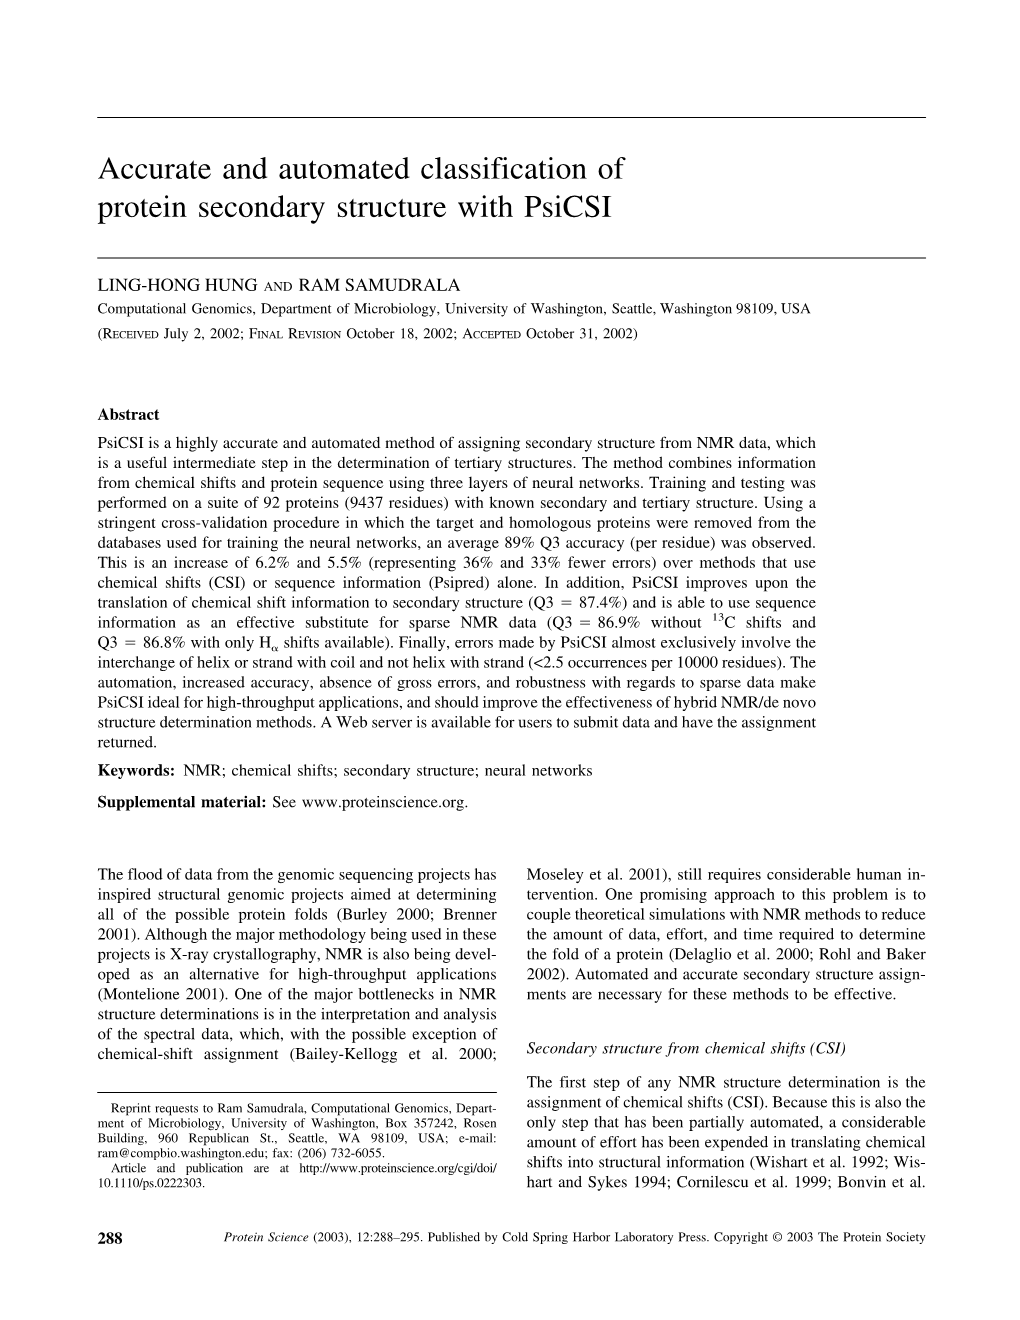 Accurate and Automated Classification of Protein Secondary Structure with Psicsi